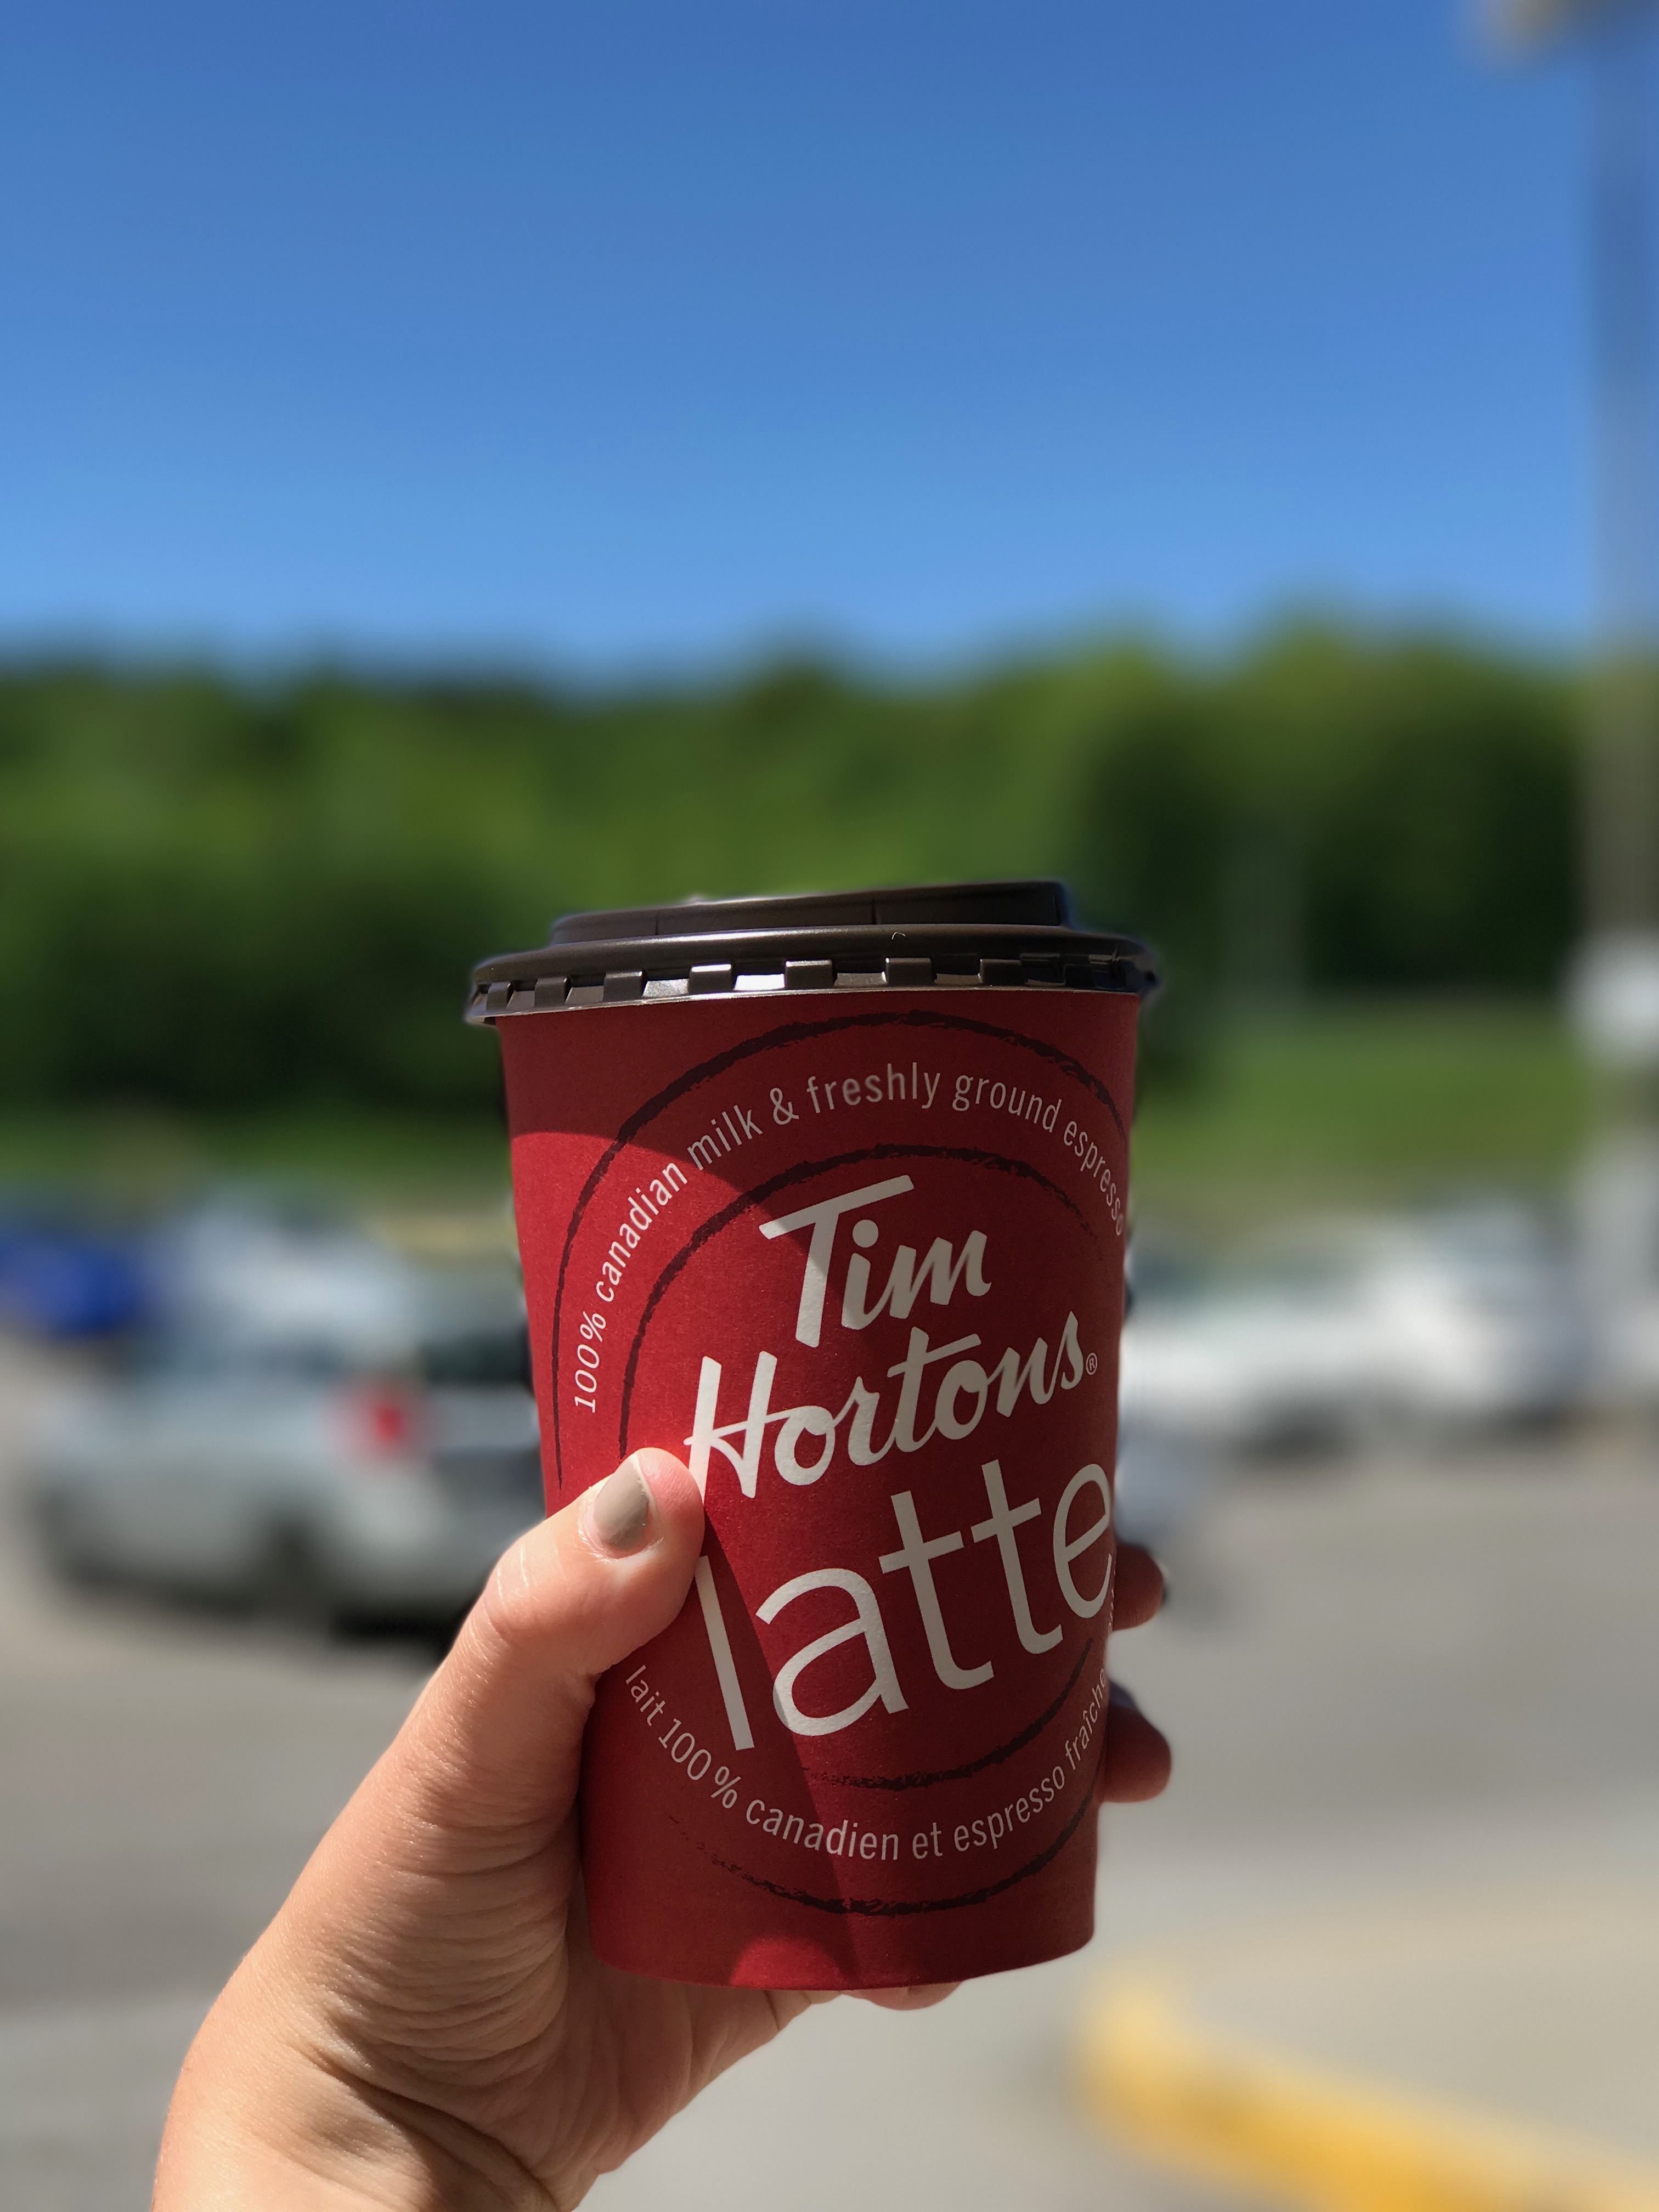 A Roadtrip to montreal Canada includes stops at Tim Horton's